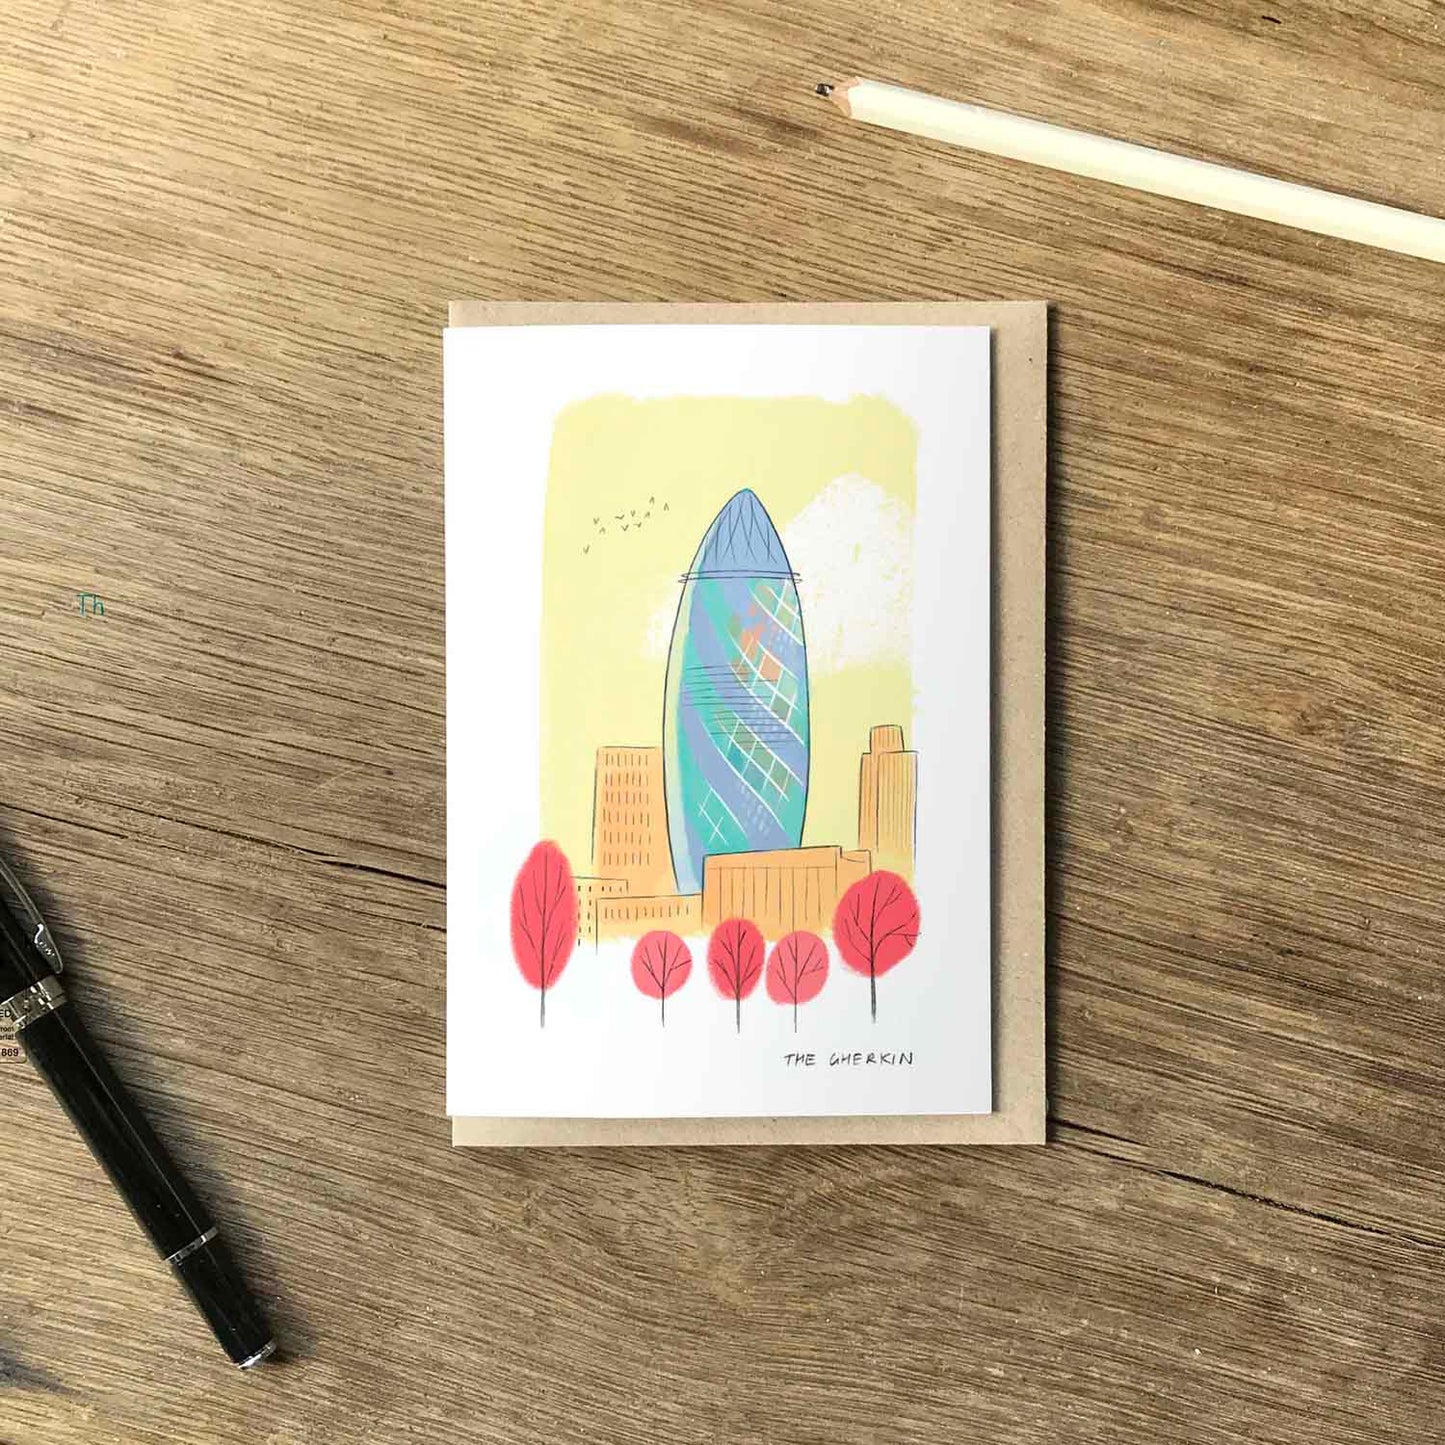 London's the Gherkin beautifully illustrated on a greeting card from mike green illustration.